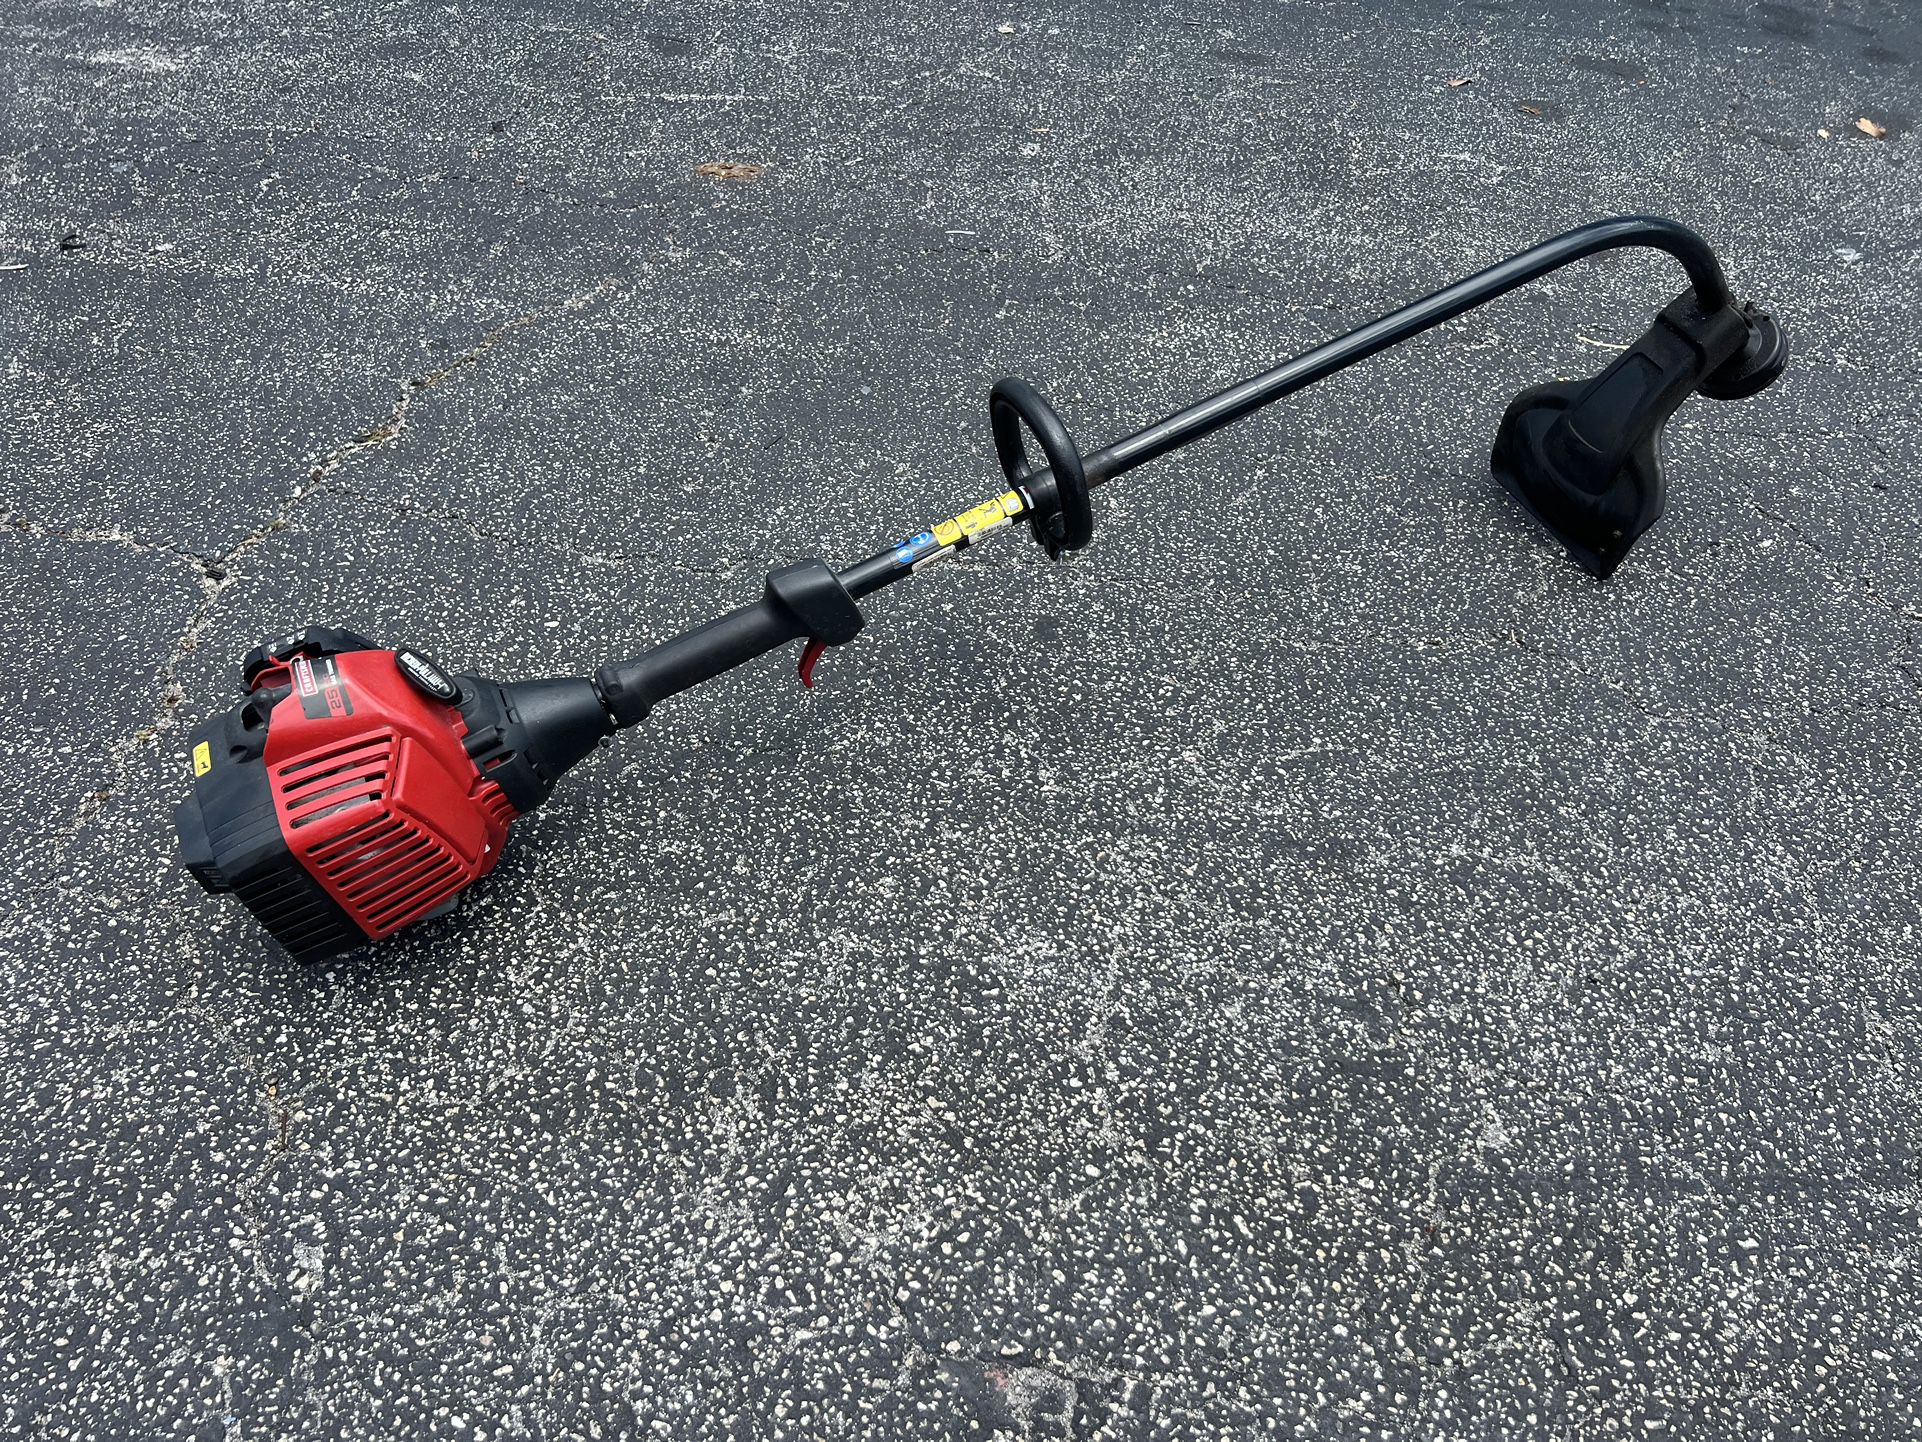 CRAFTSMAN 25-cc 2-cycle 17-in Straight Shaft Gas String Trimmer WeedWacker! Works Great! Retails $169